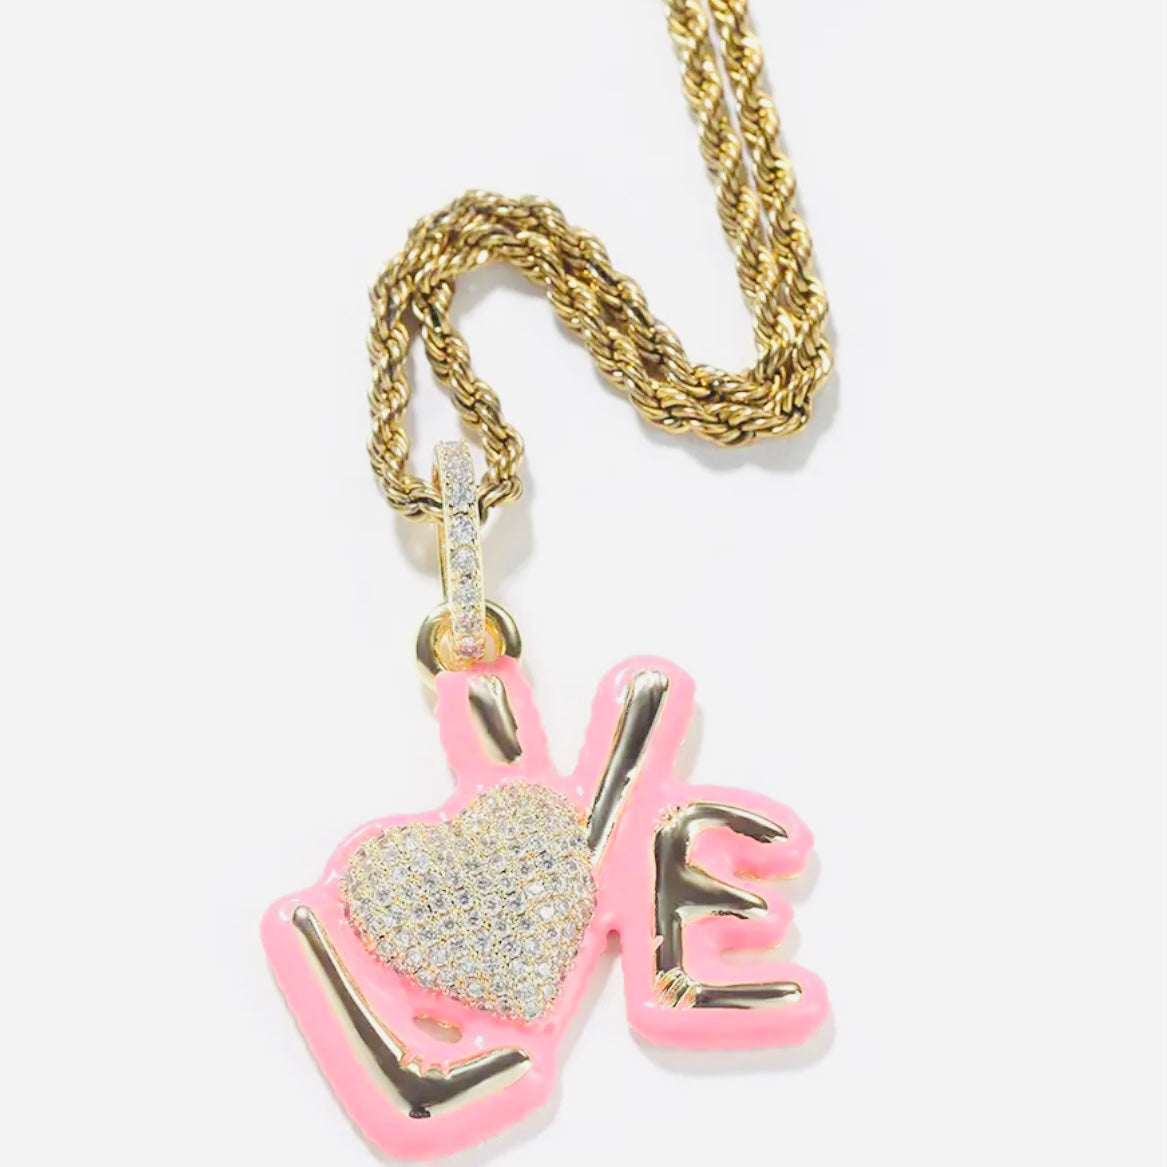 love pendant in the color pink, blue, silver or silver chrome with a matching diamond chain or silver or gold rope chain available only at Facetreasures.com